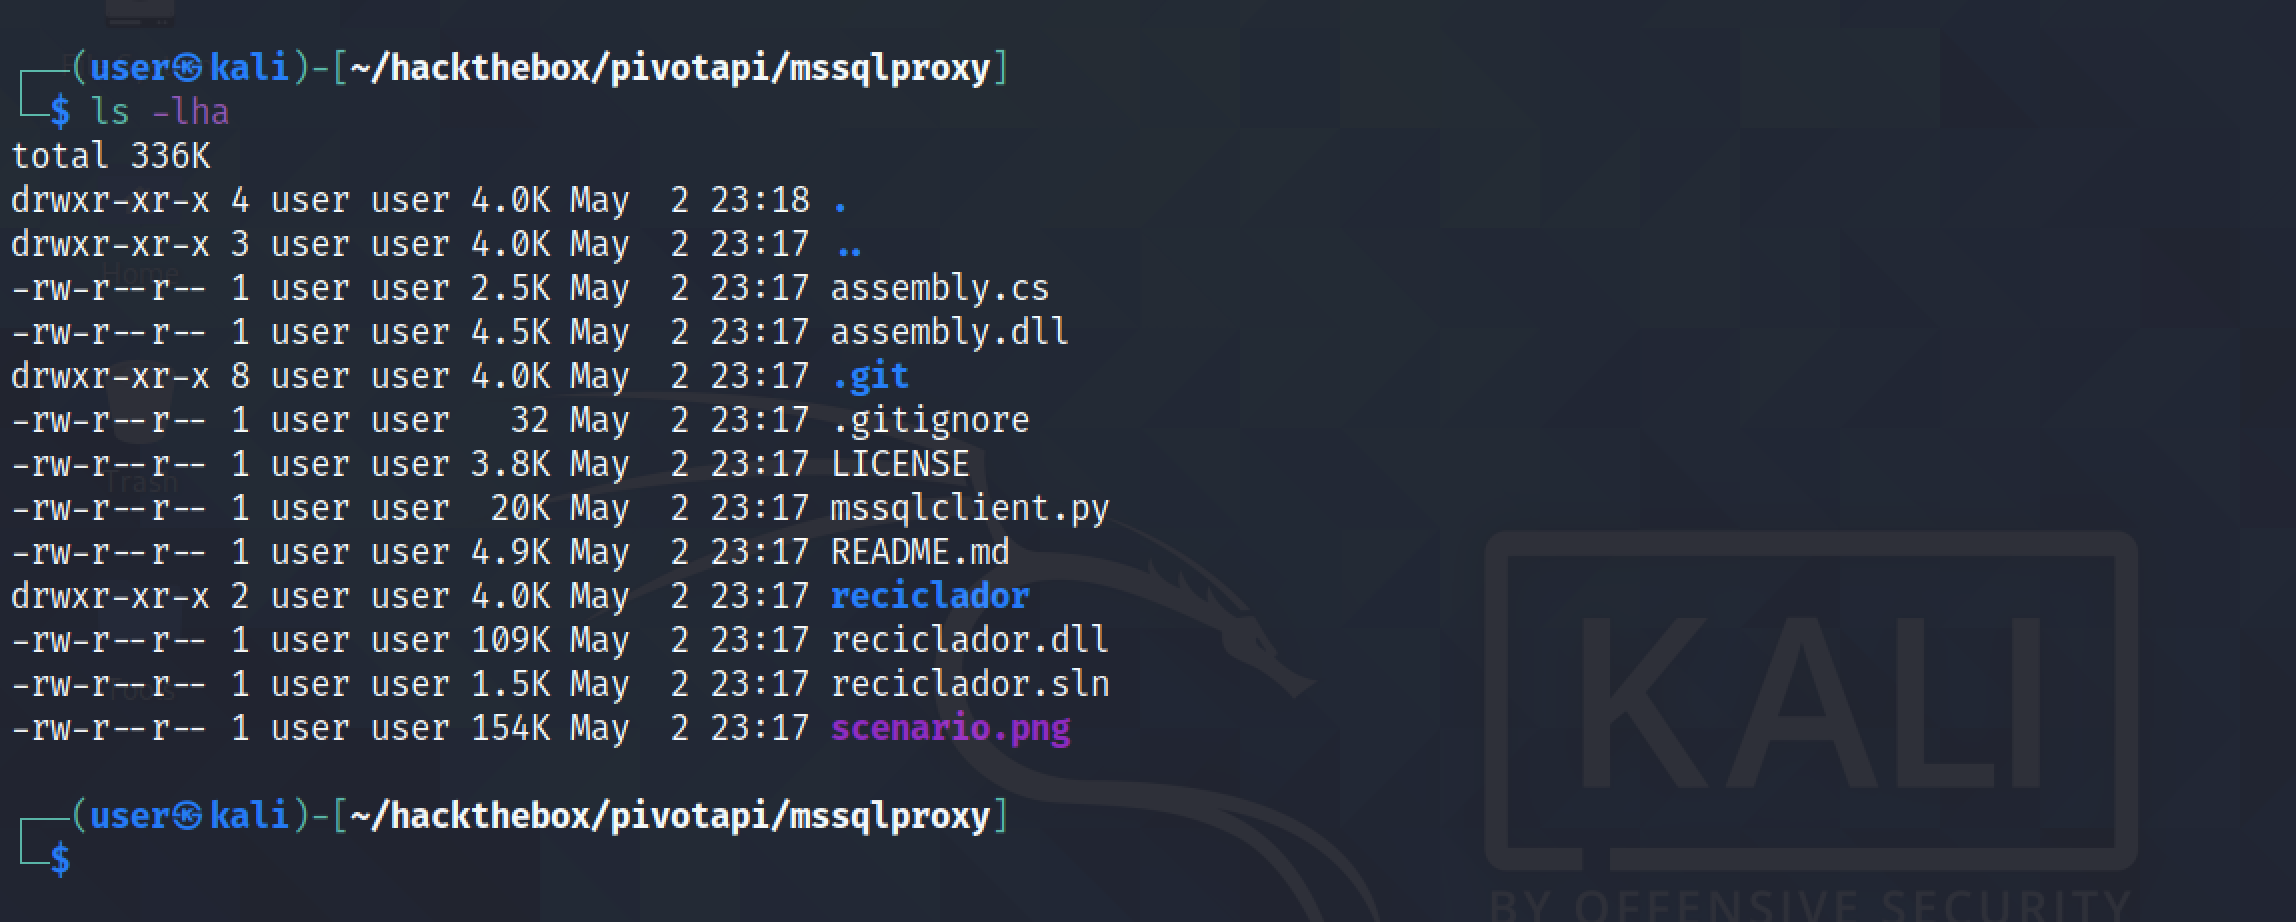 Contents of the mssqlproxy repo.